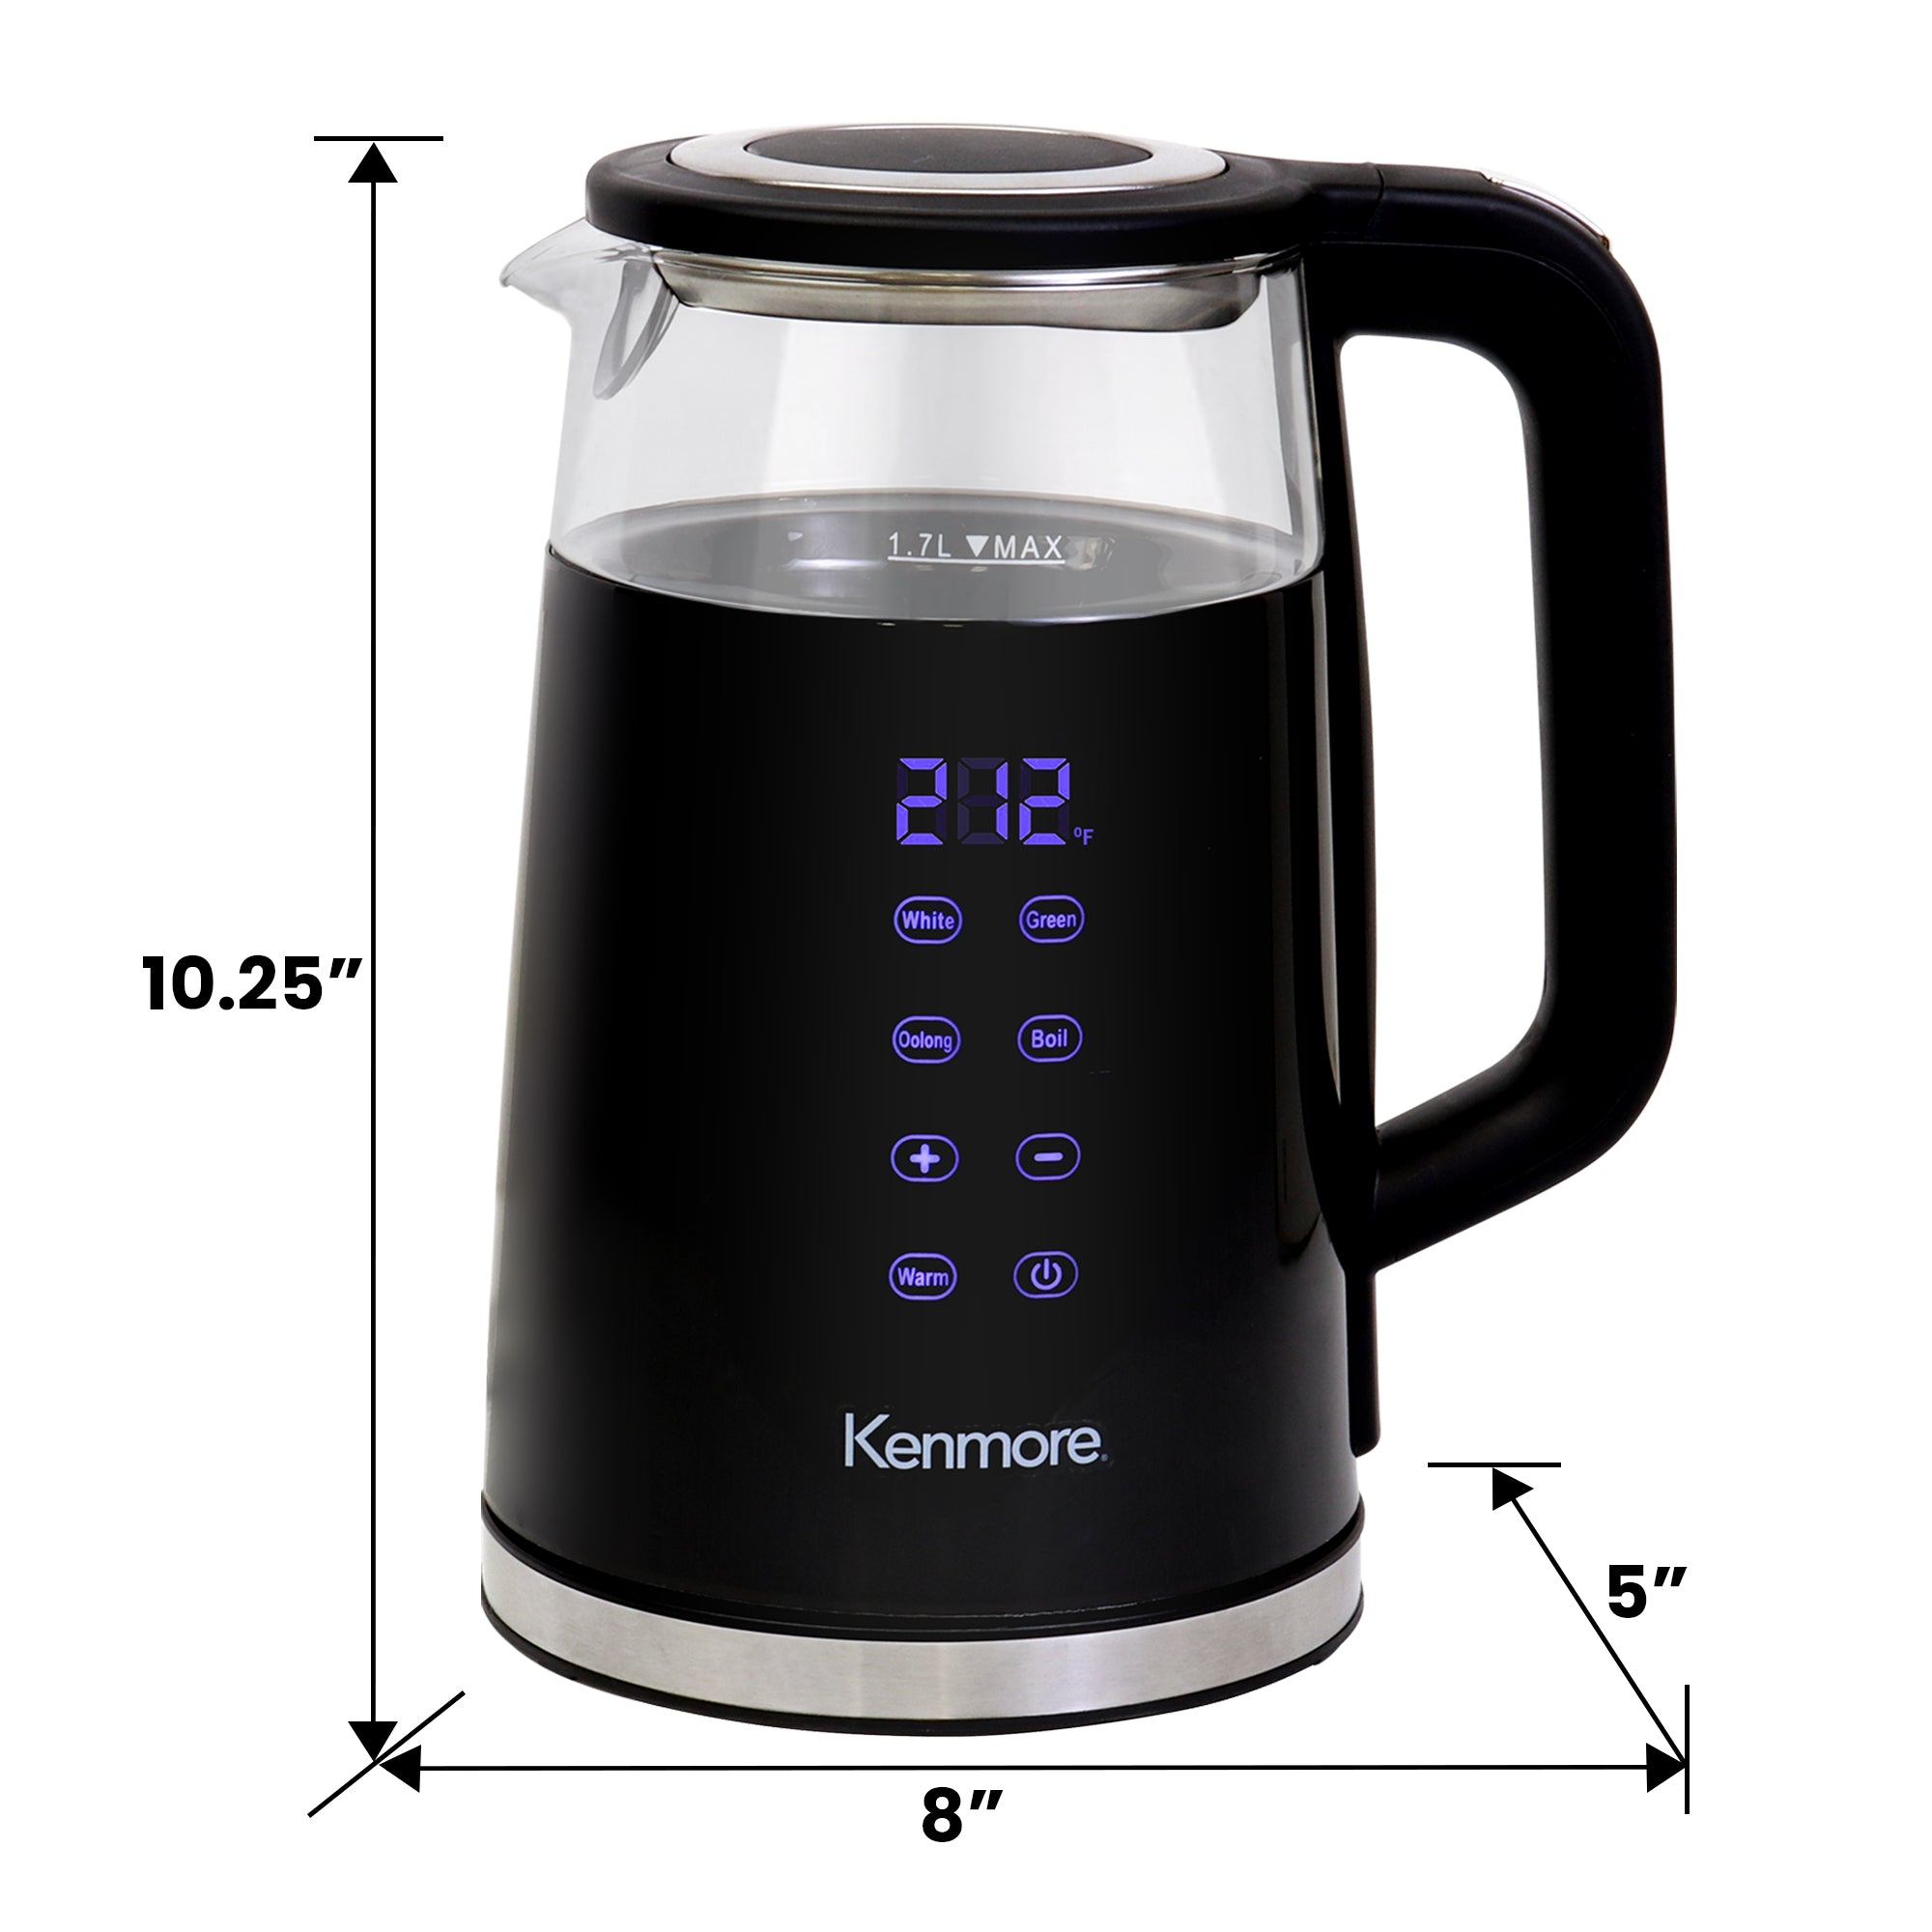 Kenmore digital cordless glass kettle on a white background with dimensions listed